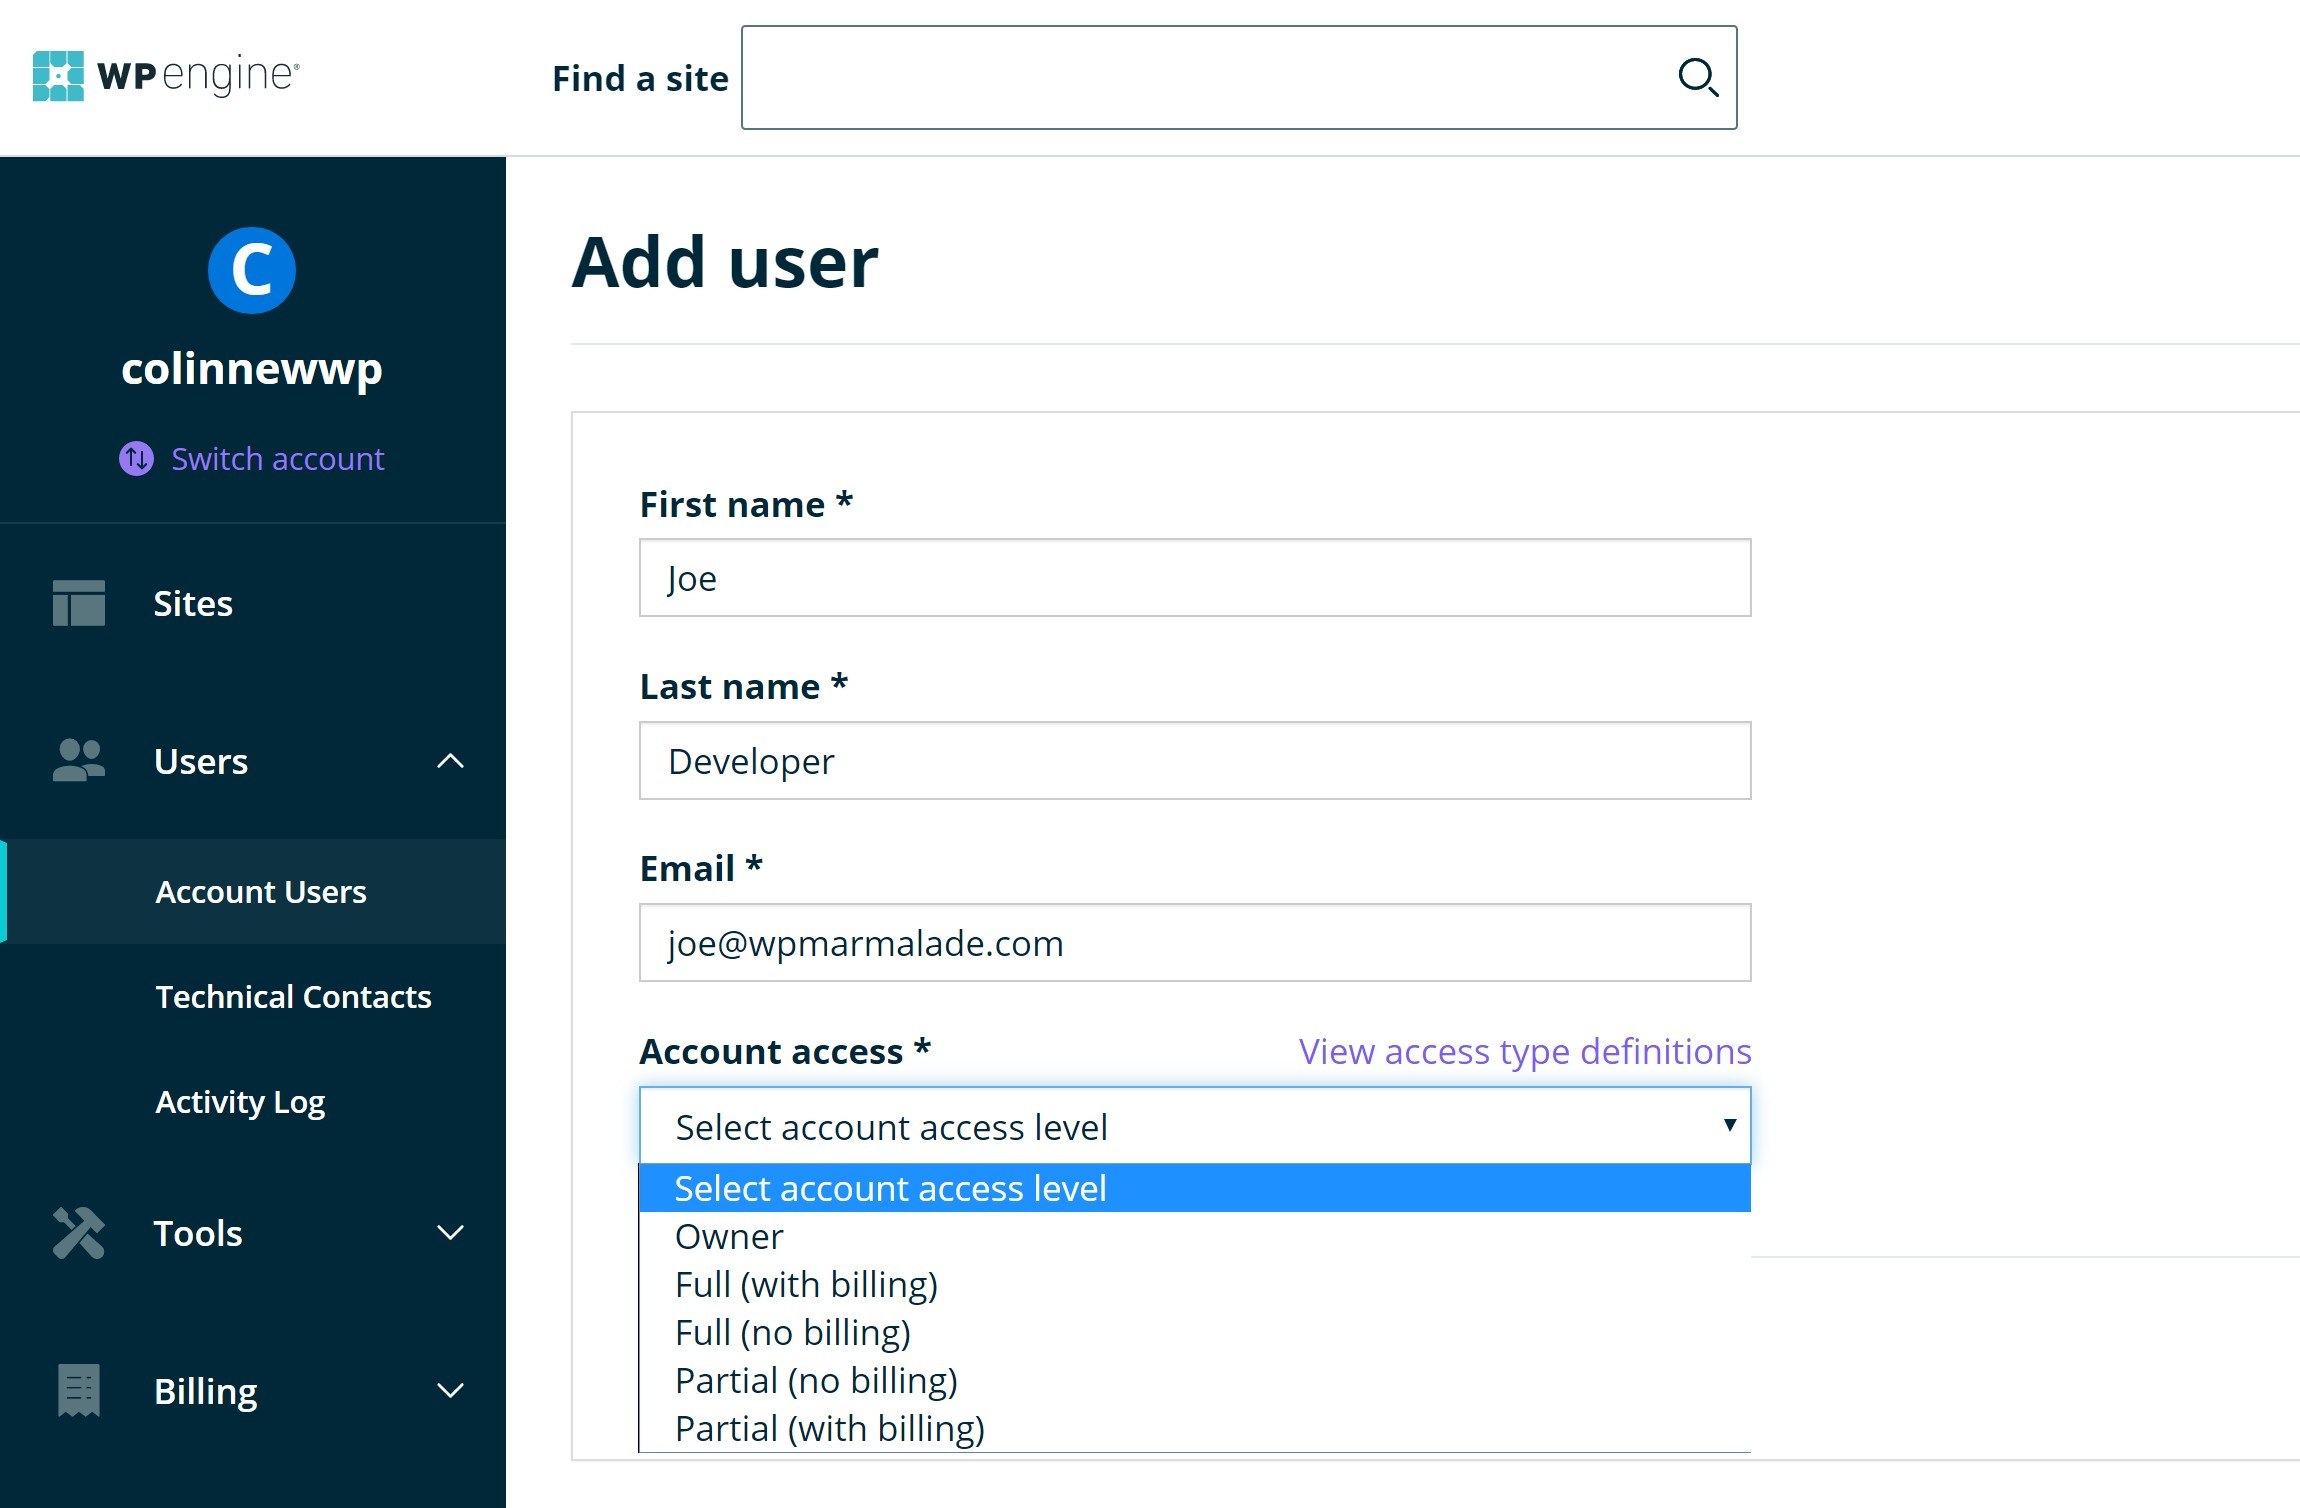 How to add a user at WP Engine